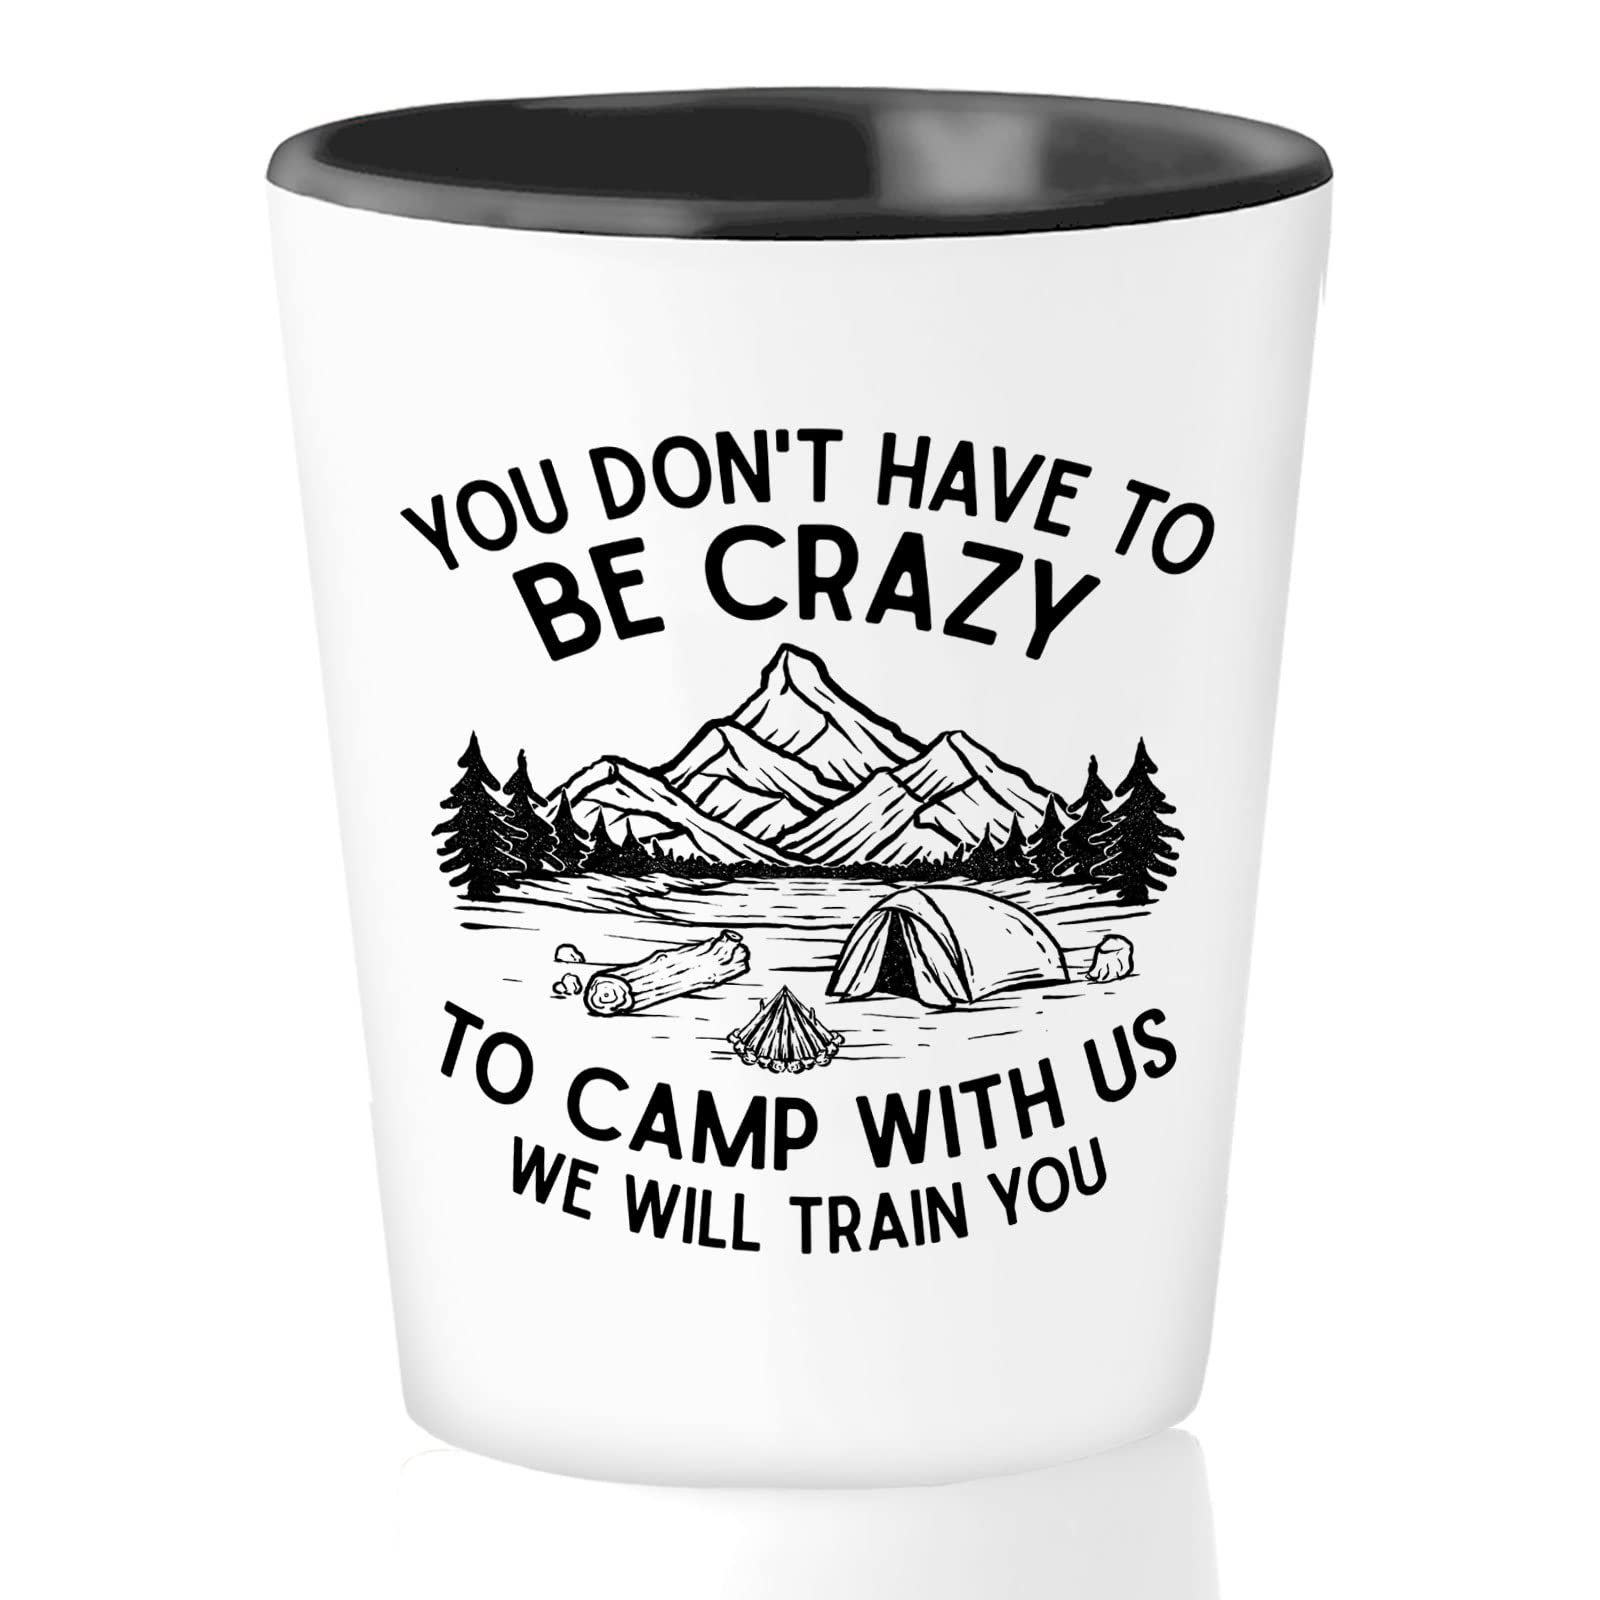 Bubble Hugs Funny Camping Shot Glass 1.5oz - You don’t have to be crazy - Hiking Woods Adventure Explorer Travel Outdoor Camping